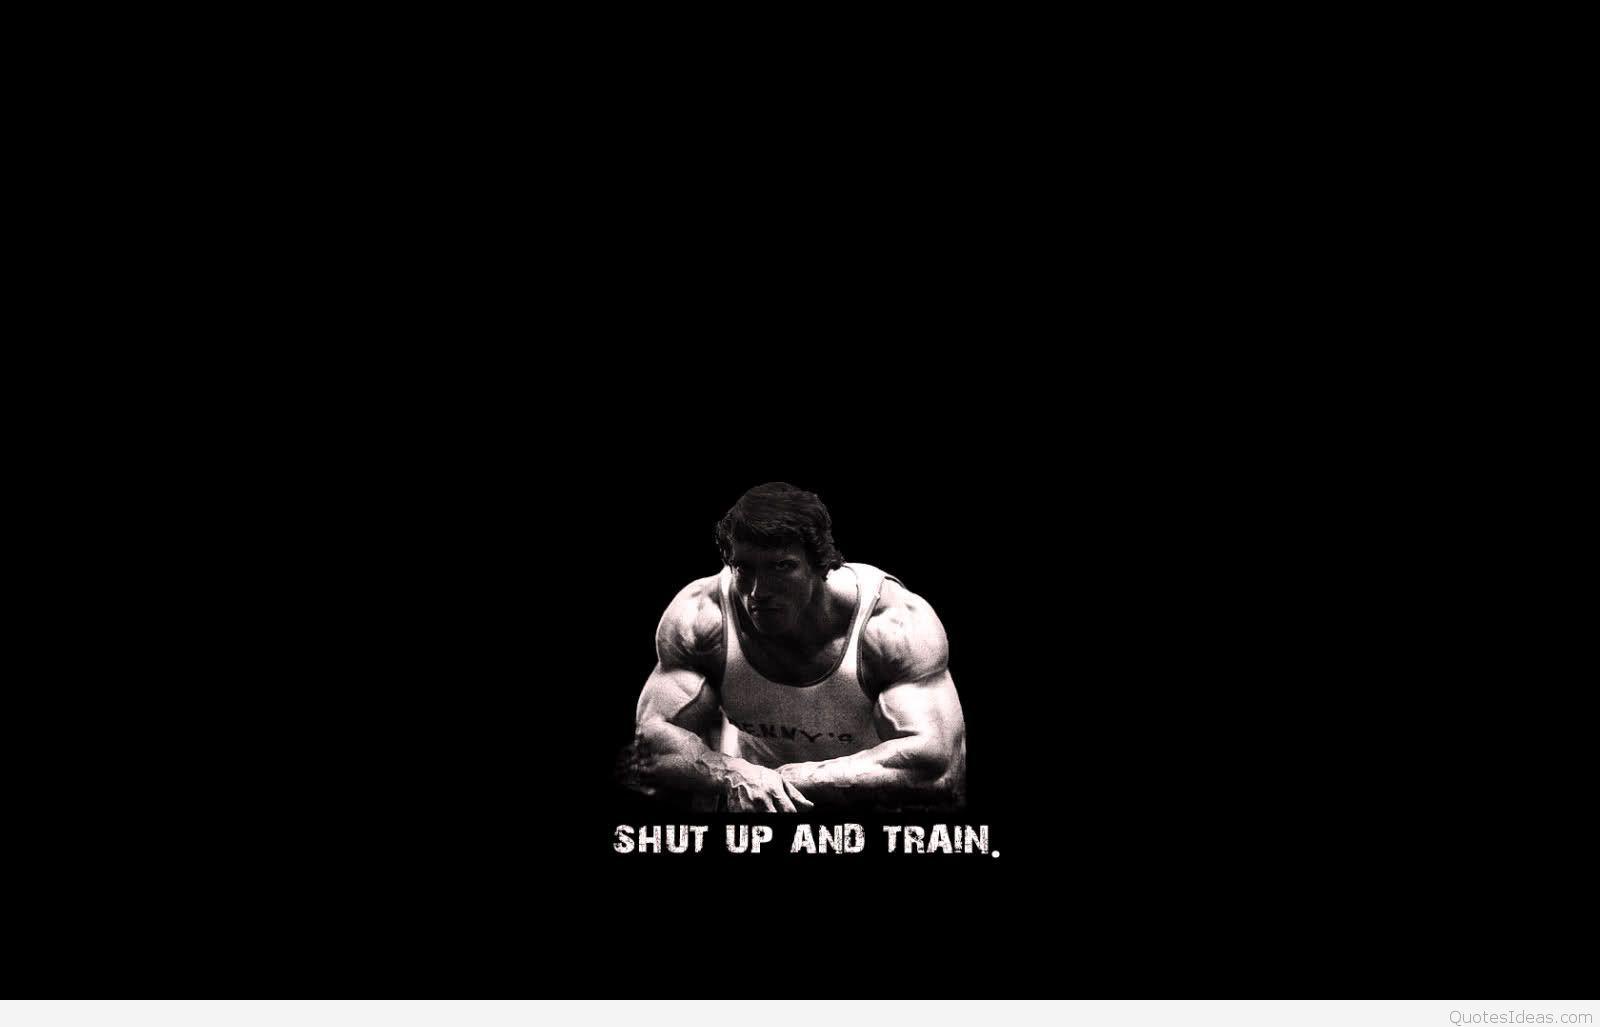 Shut up and train quote wallpaper